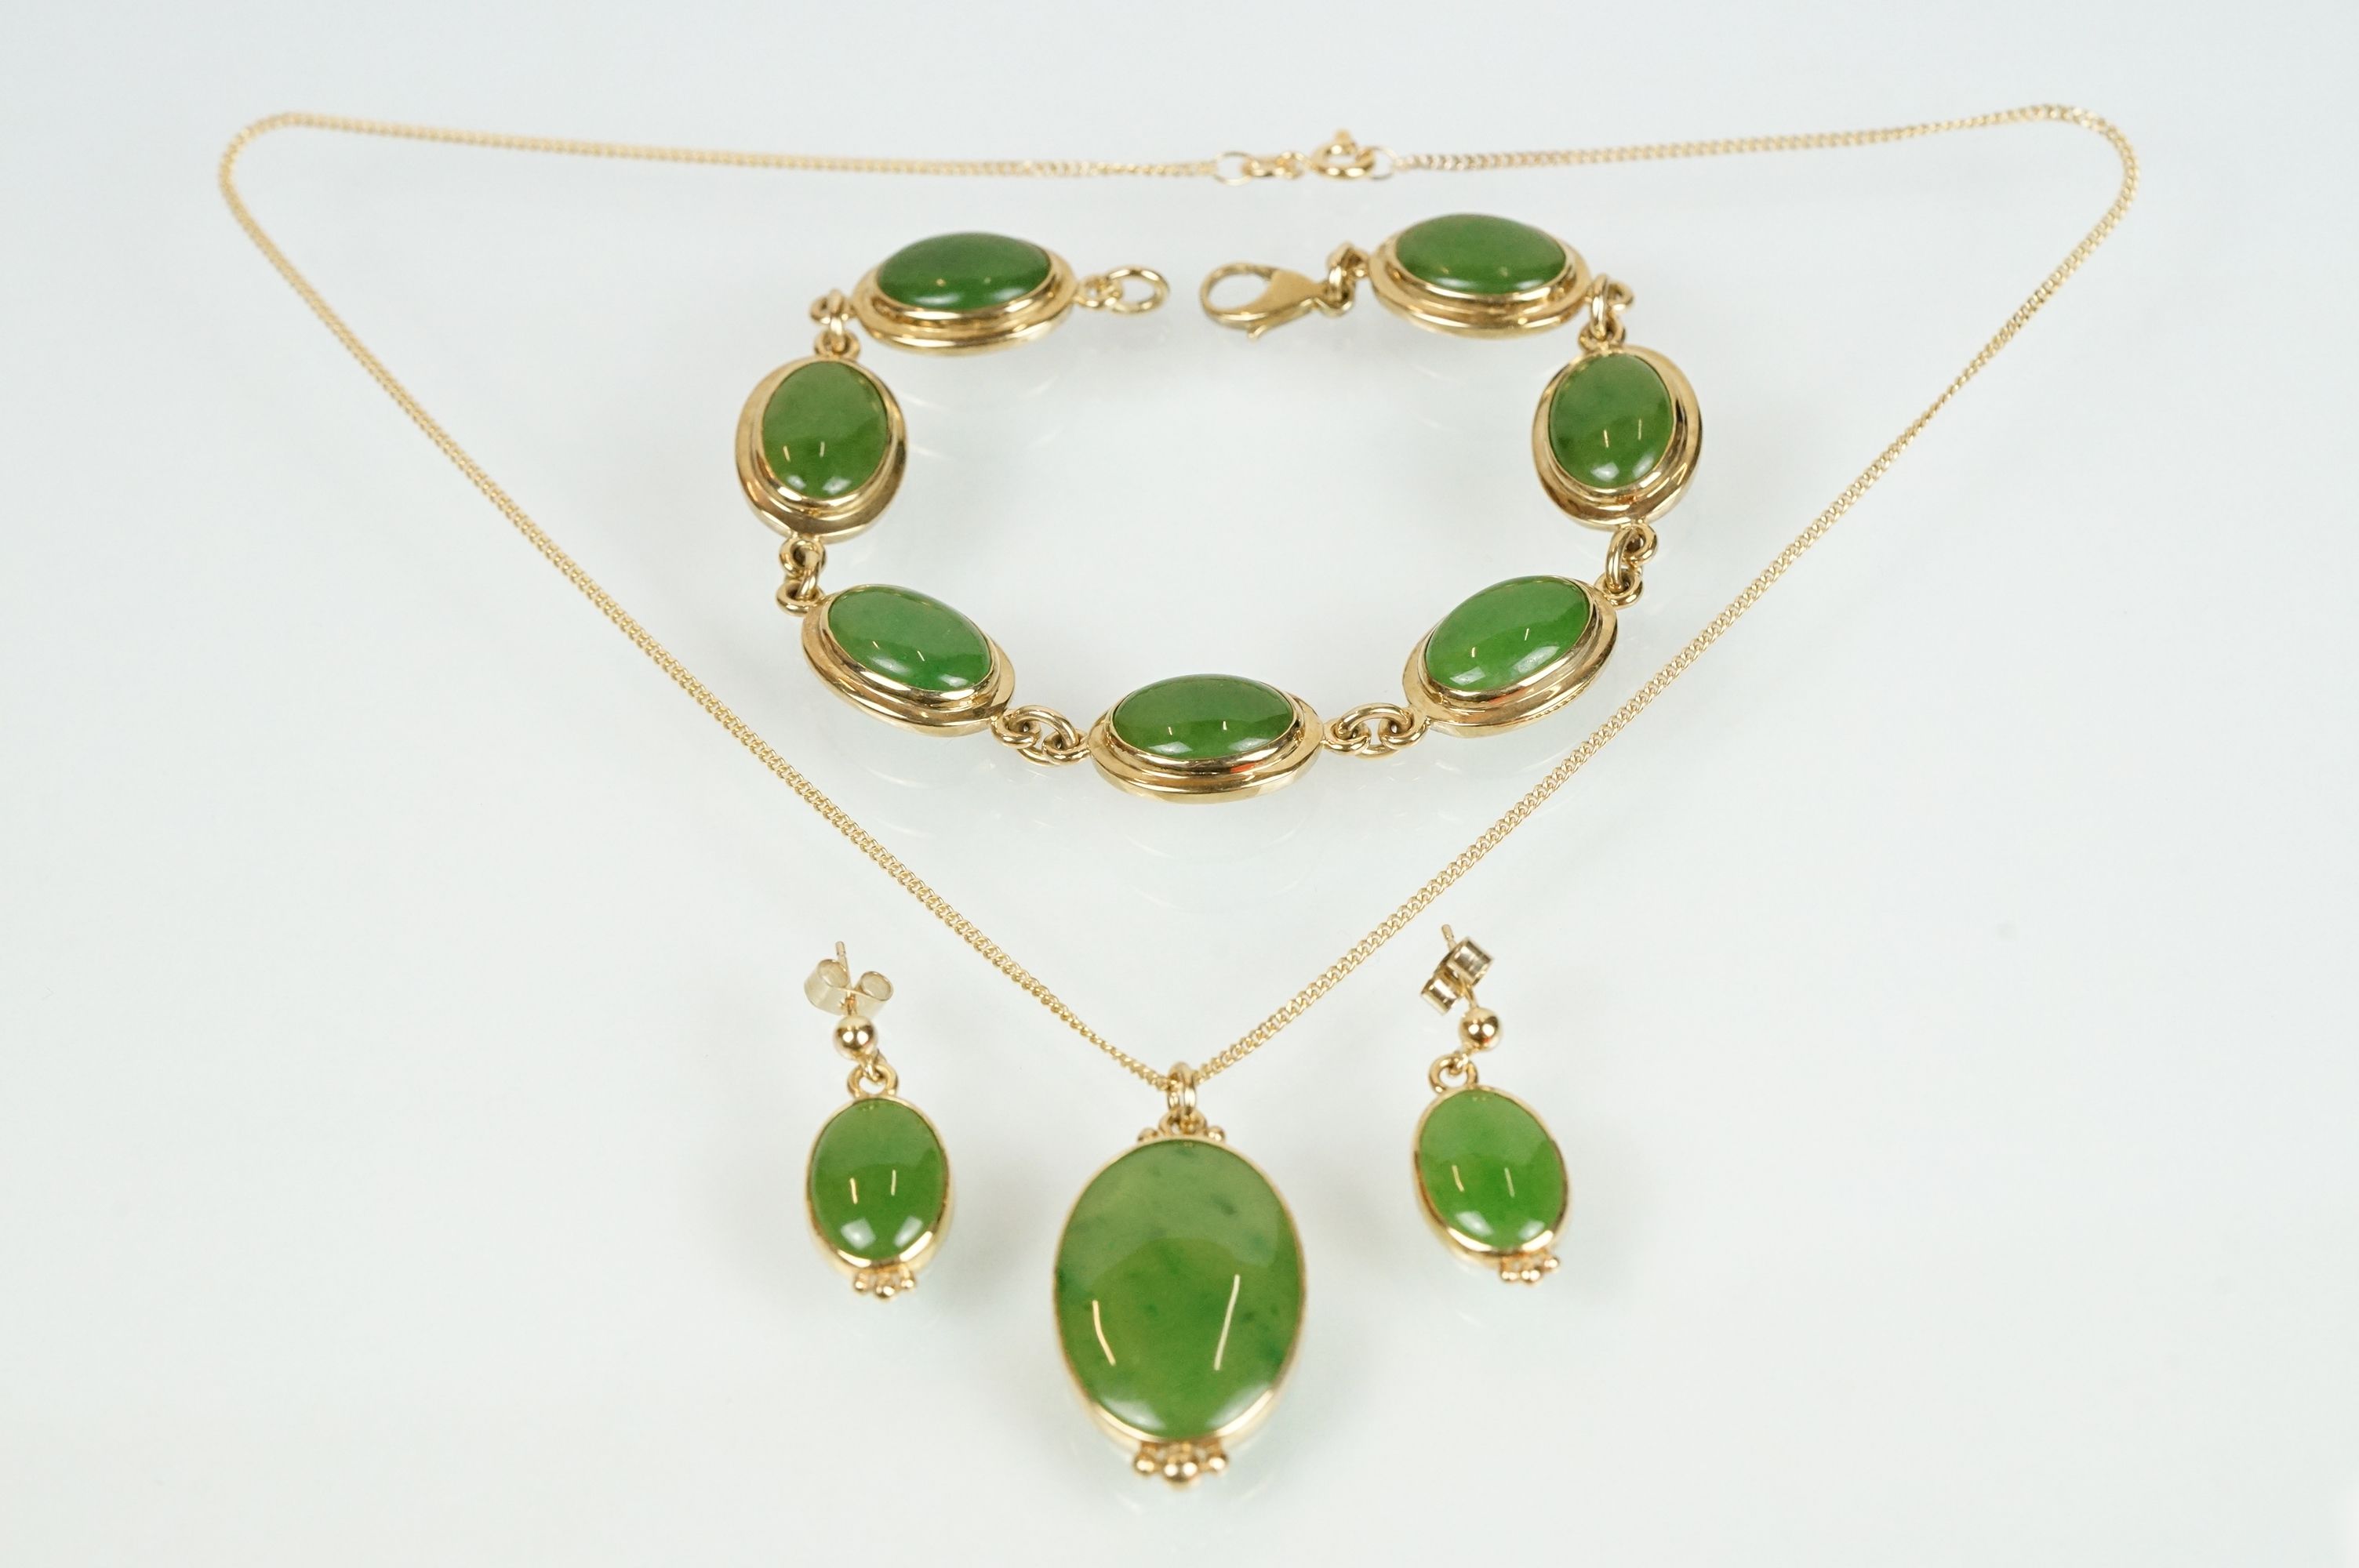 9ct gold and nephrite earrings, bracelet and pendant necklace. The bracelet set with seven